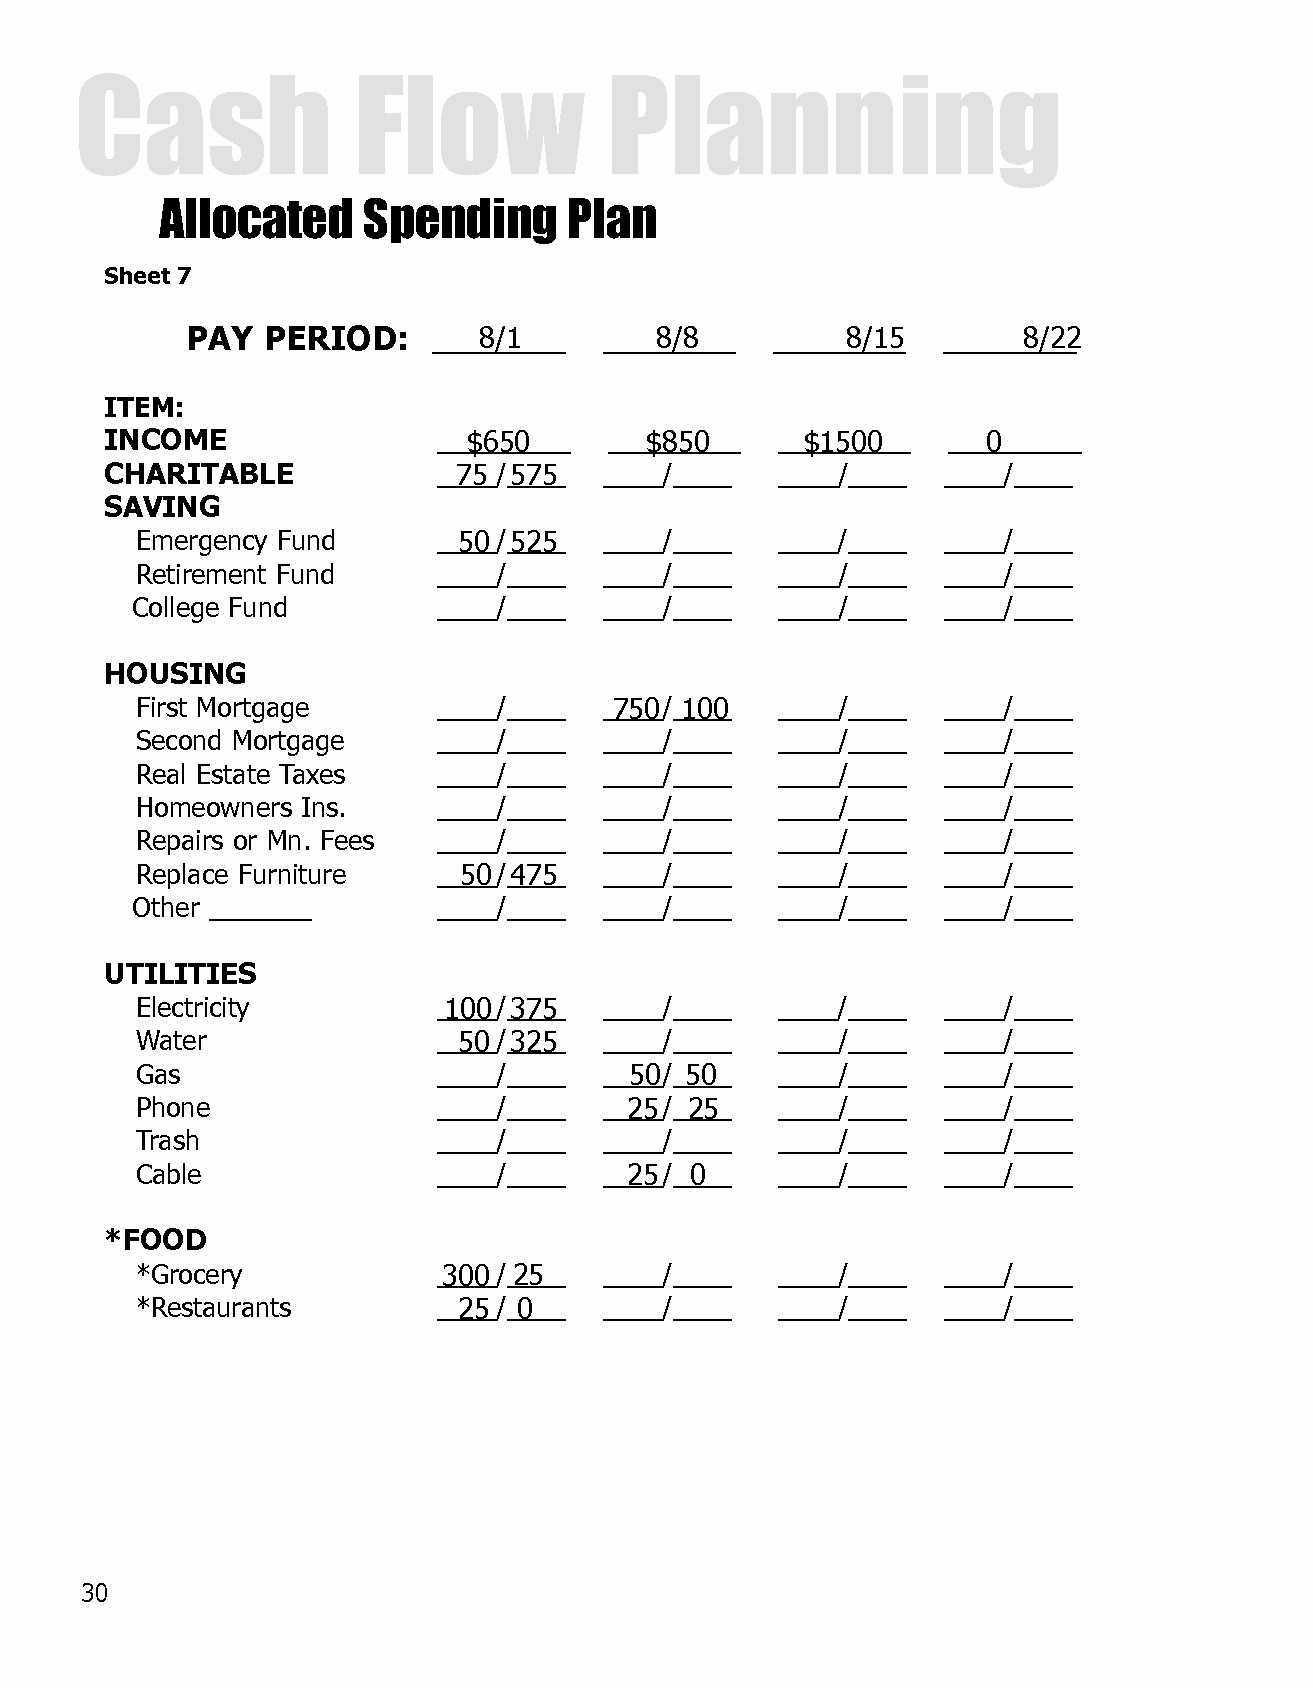 Financial Peace University Forms Form Templates Allocated Spending Document Dave Ramsey